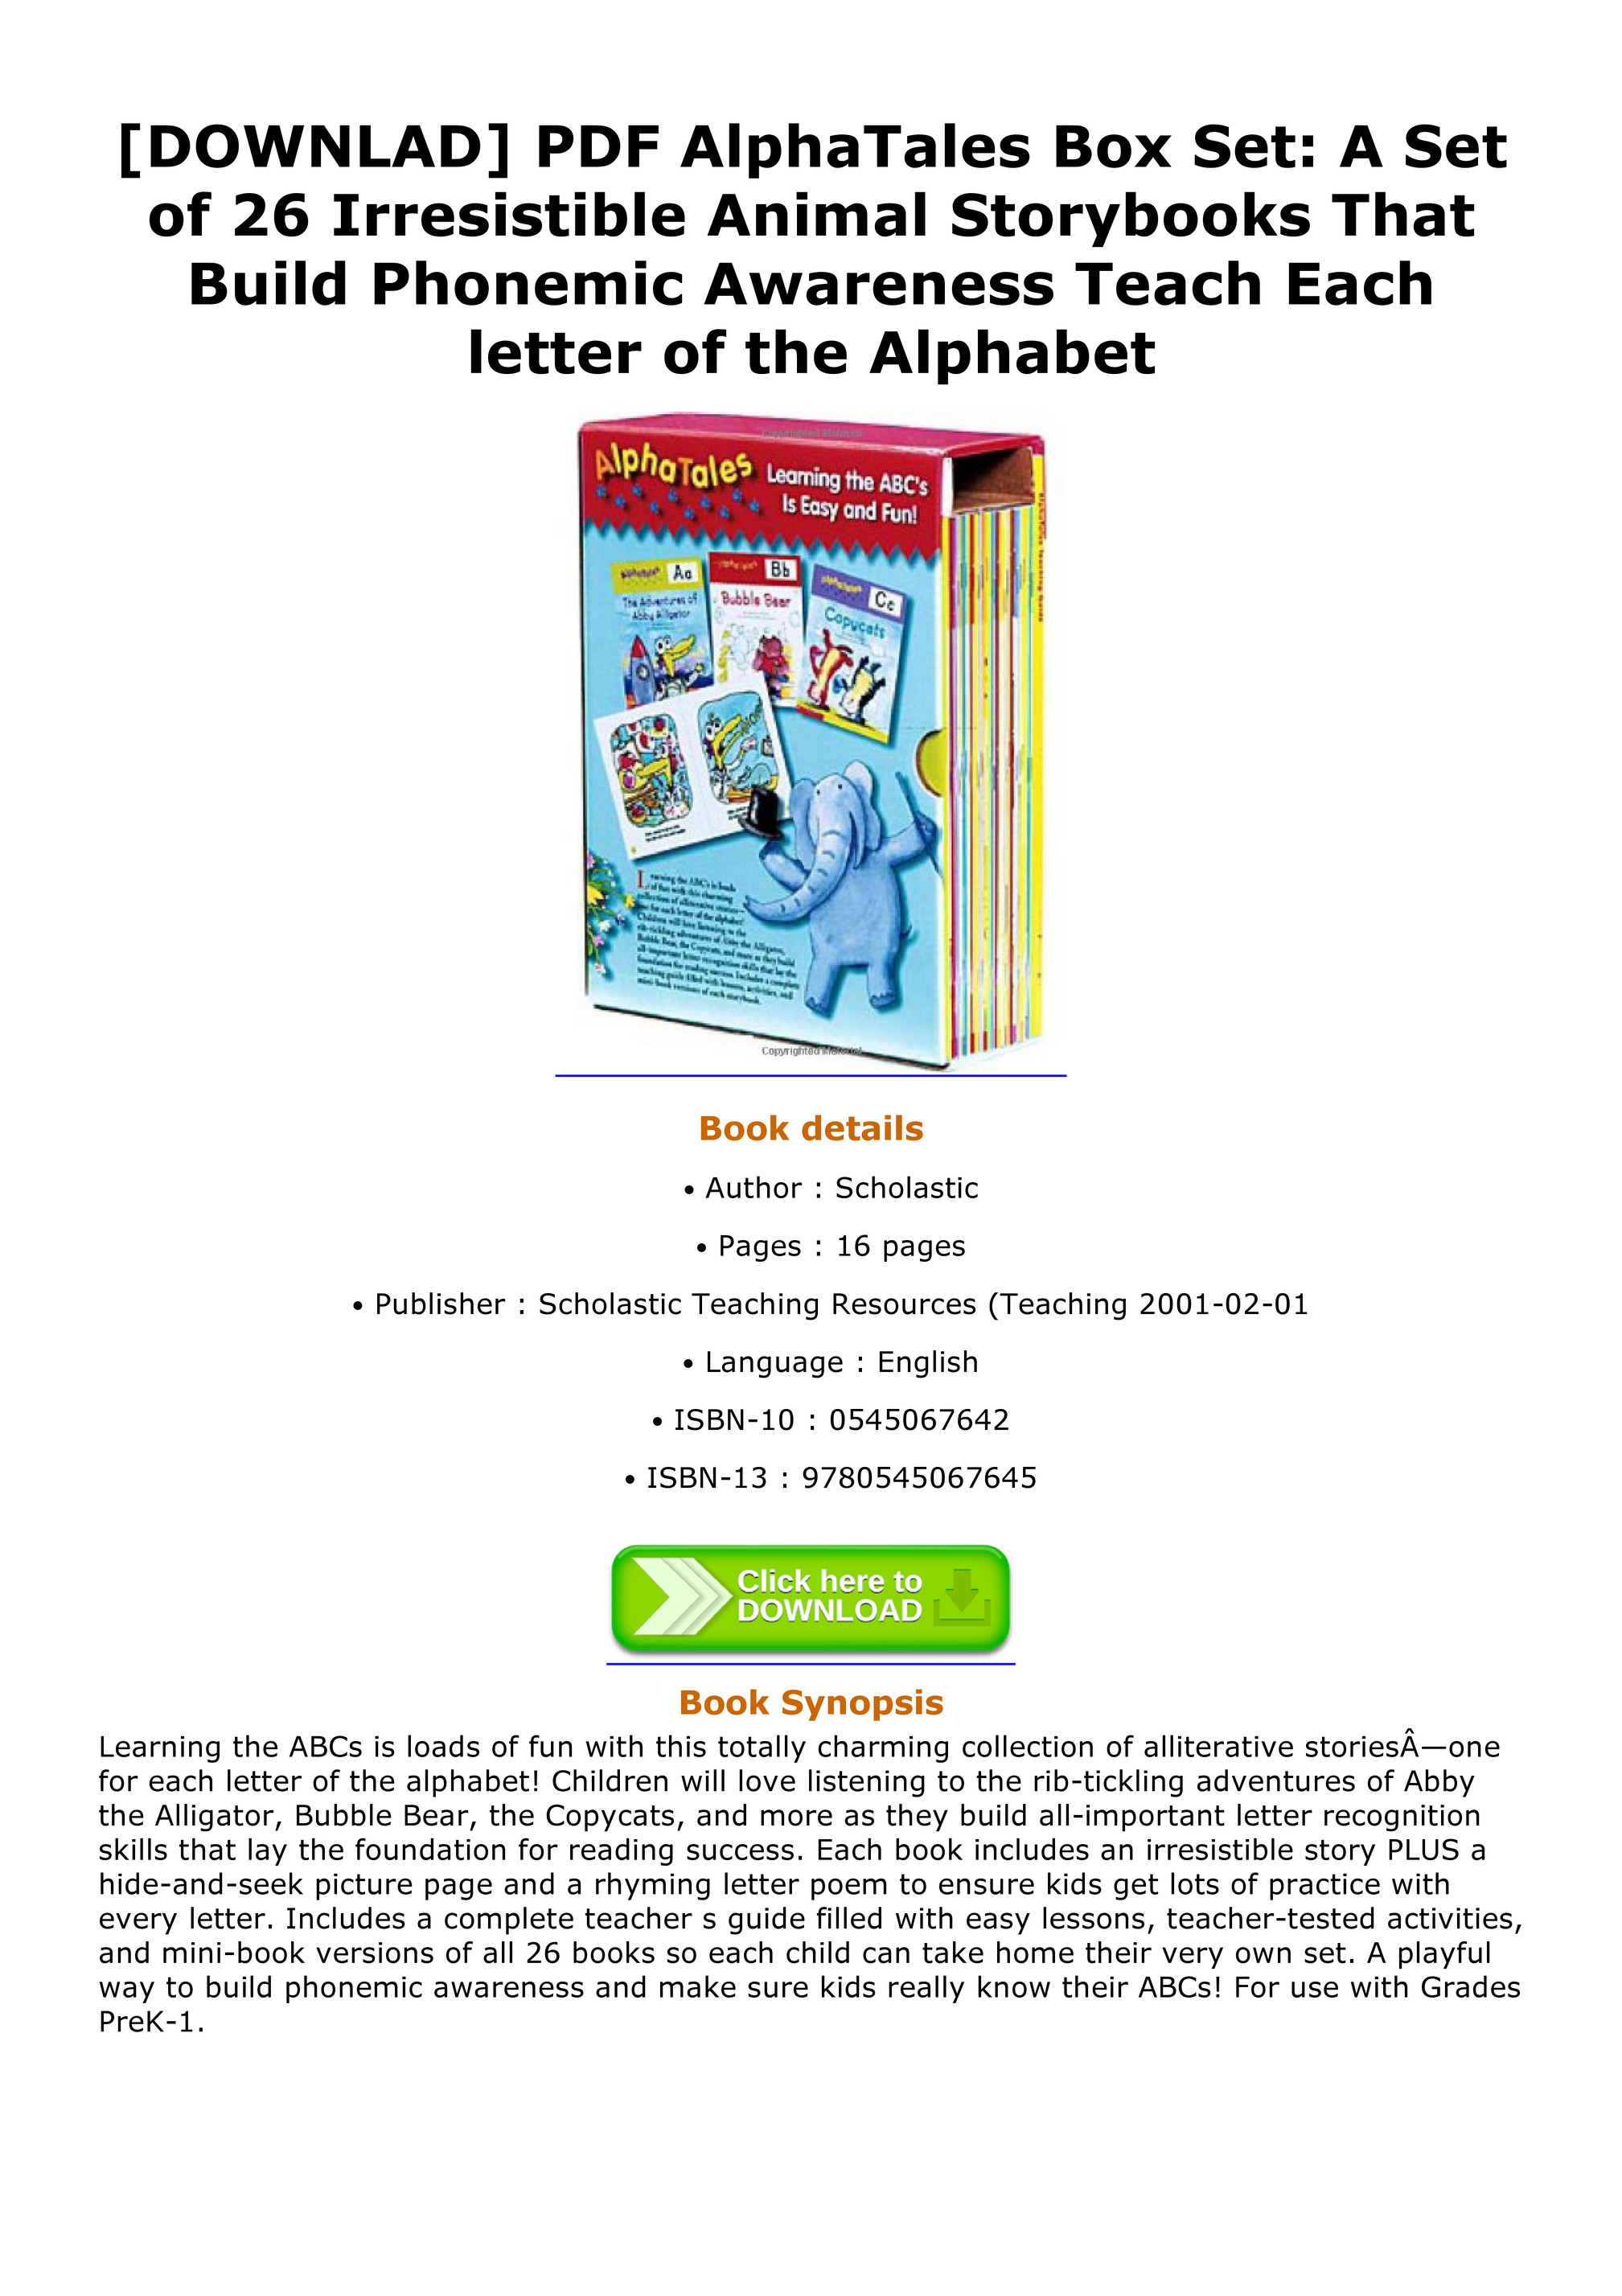 e-Book - DOWNLAD PDF AlphaTales Box Set A Set of 26 Irresistible Animal  Storybooks That Build Phonemic Awareness Teach Each letter of the Alphabet  - Page 1 - Created with 